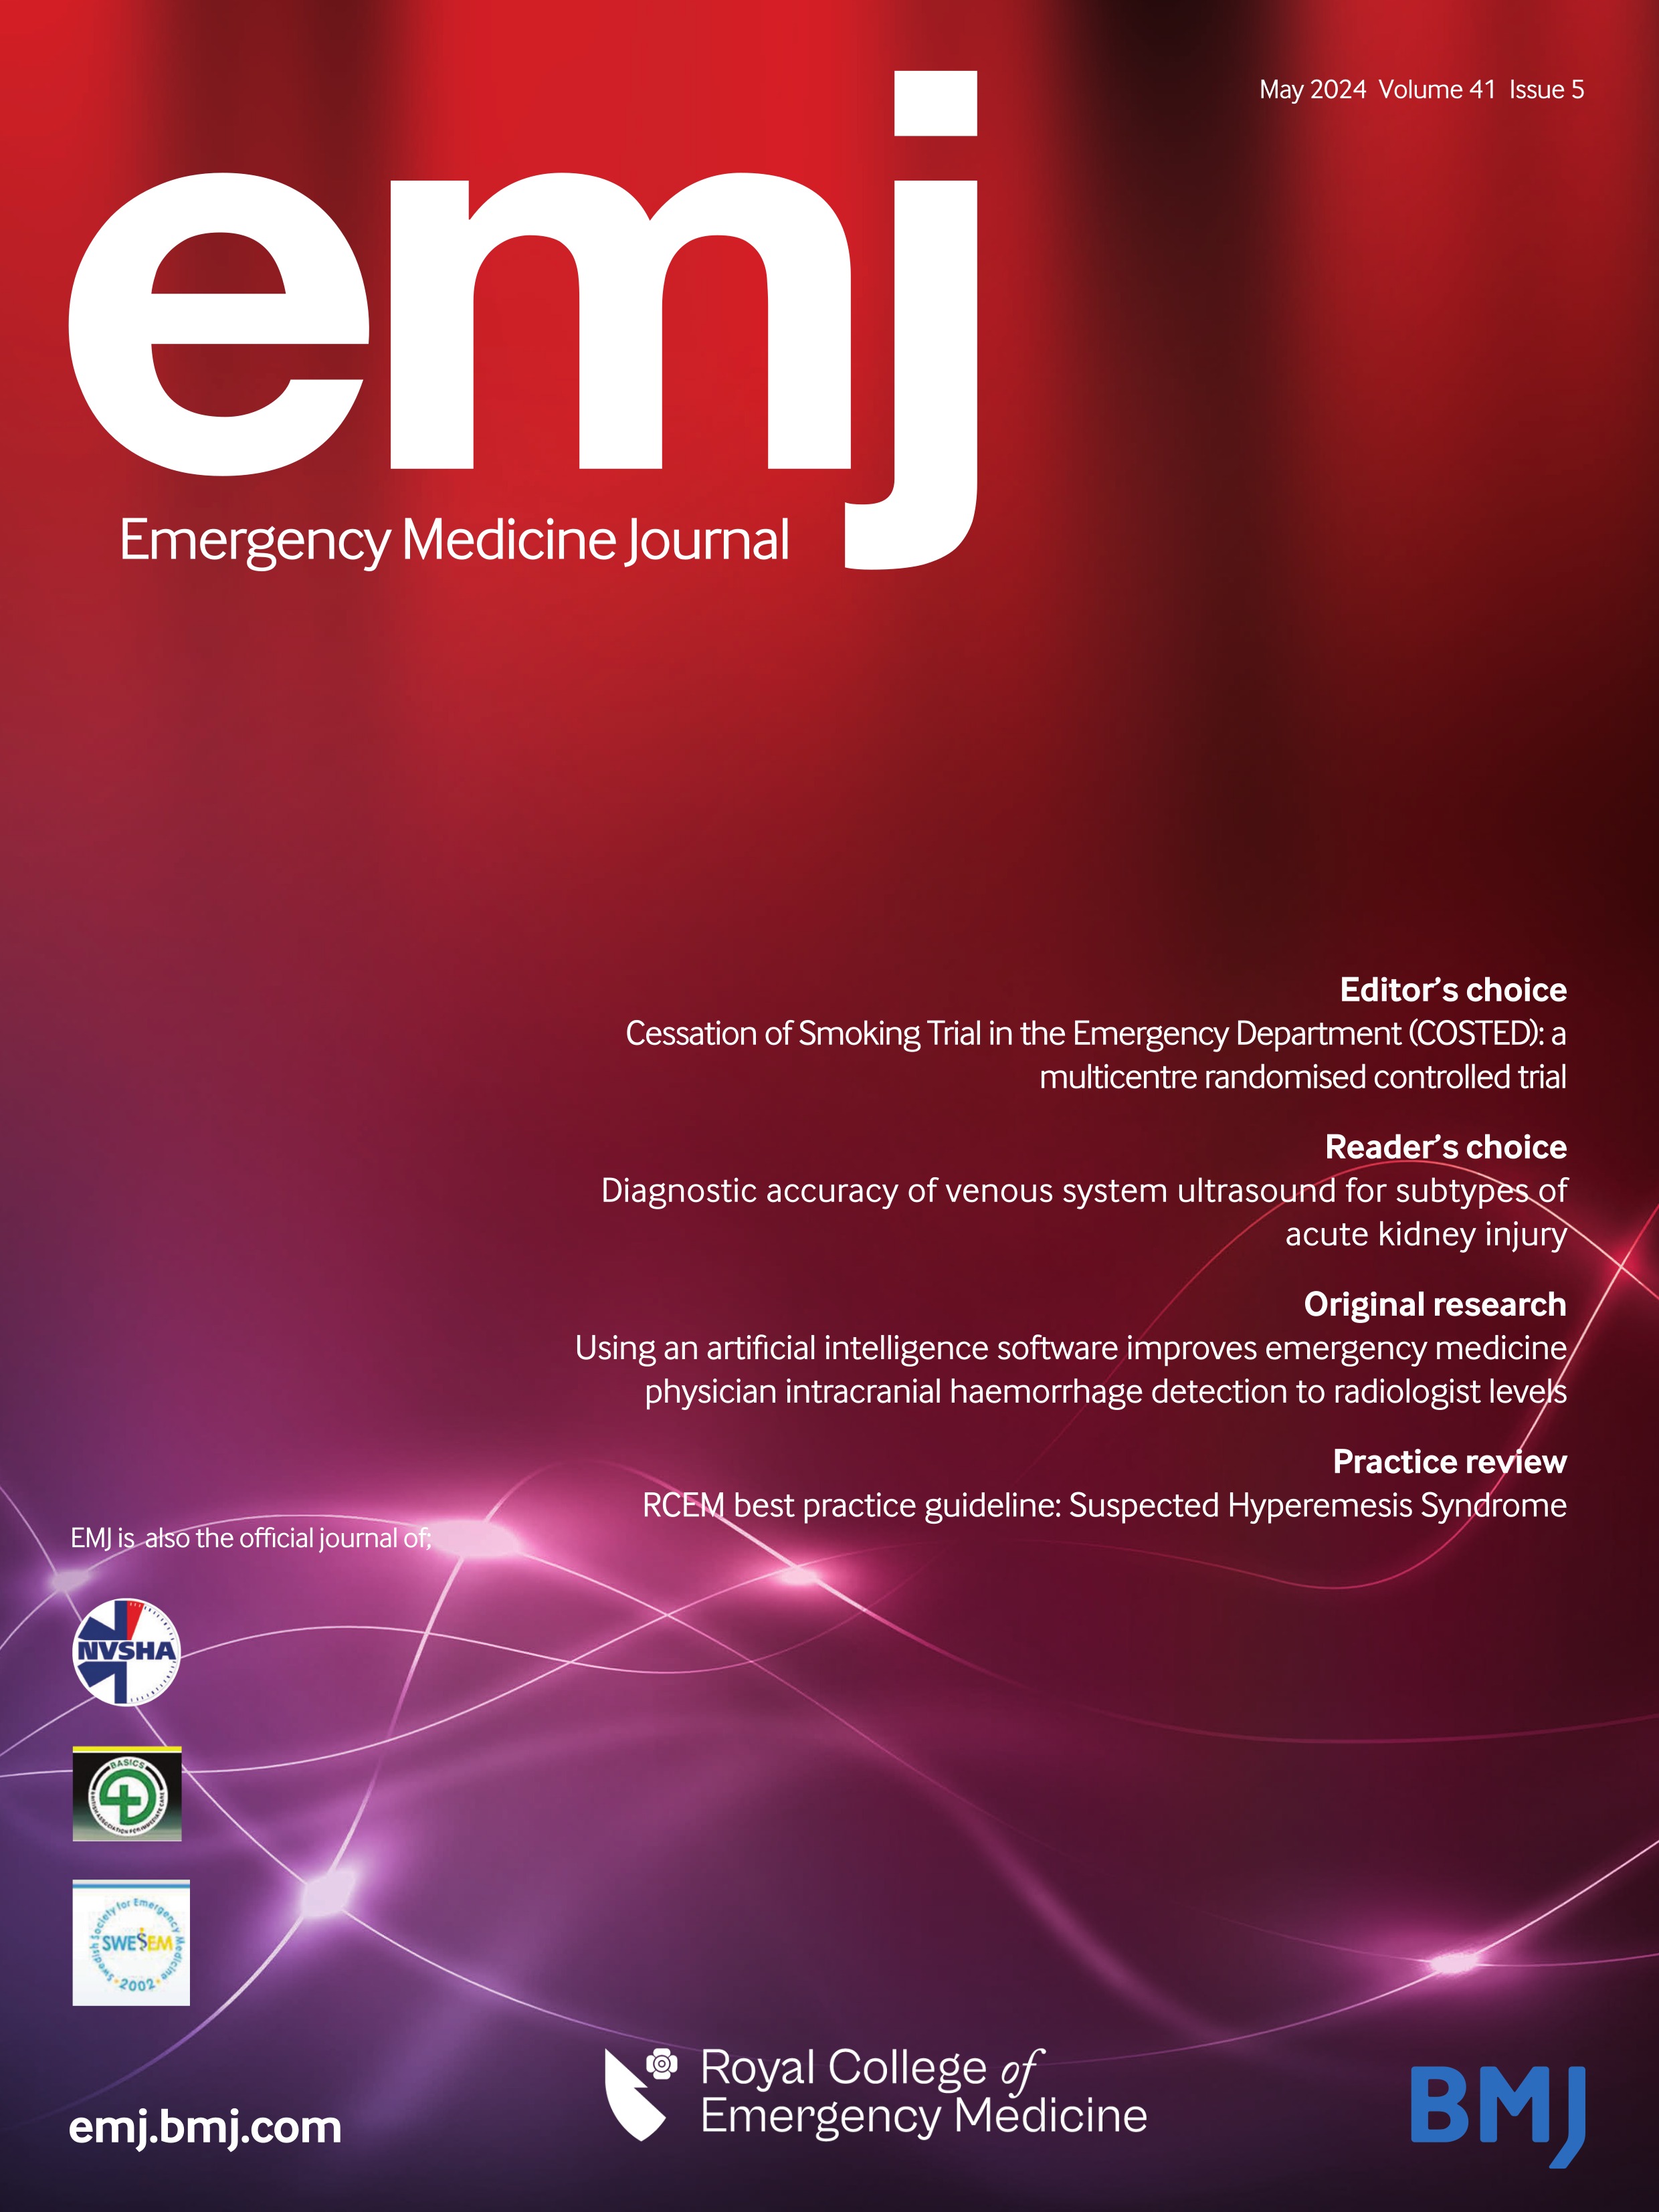 High-sensitivity troponin testing at the point of care for the diagnosis of myocardial infarction: a prospective emergency department clinical evaluation